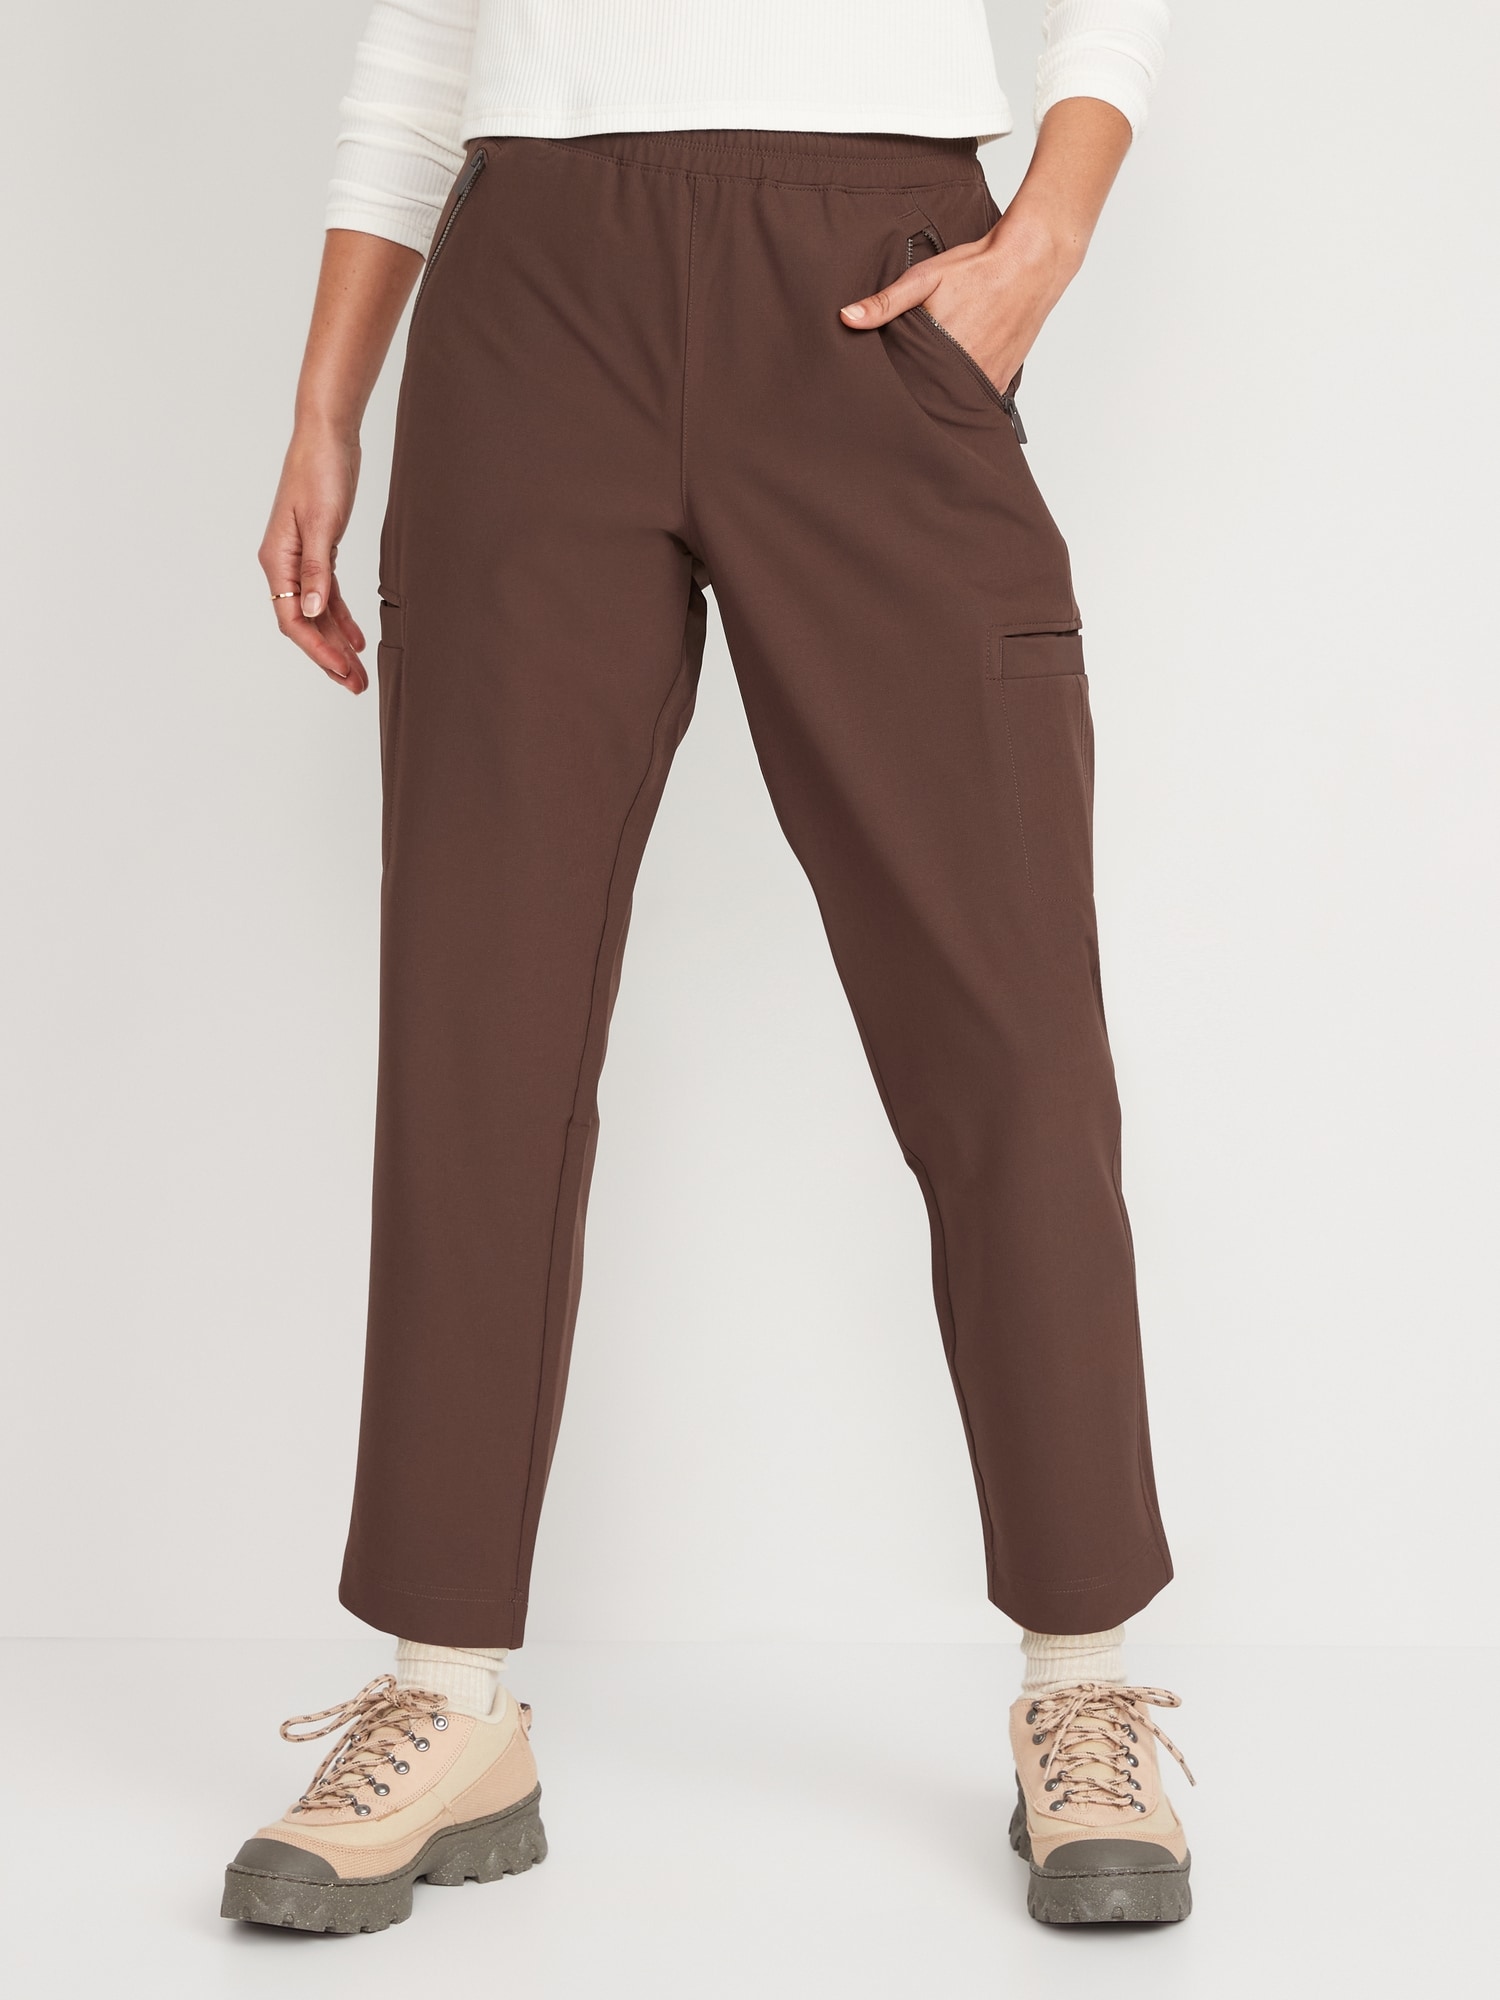 Old Navy Girls' High-Waisted Stretchtech Cargo Jogger Performance Pants Brown Regular Size S